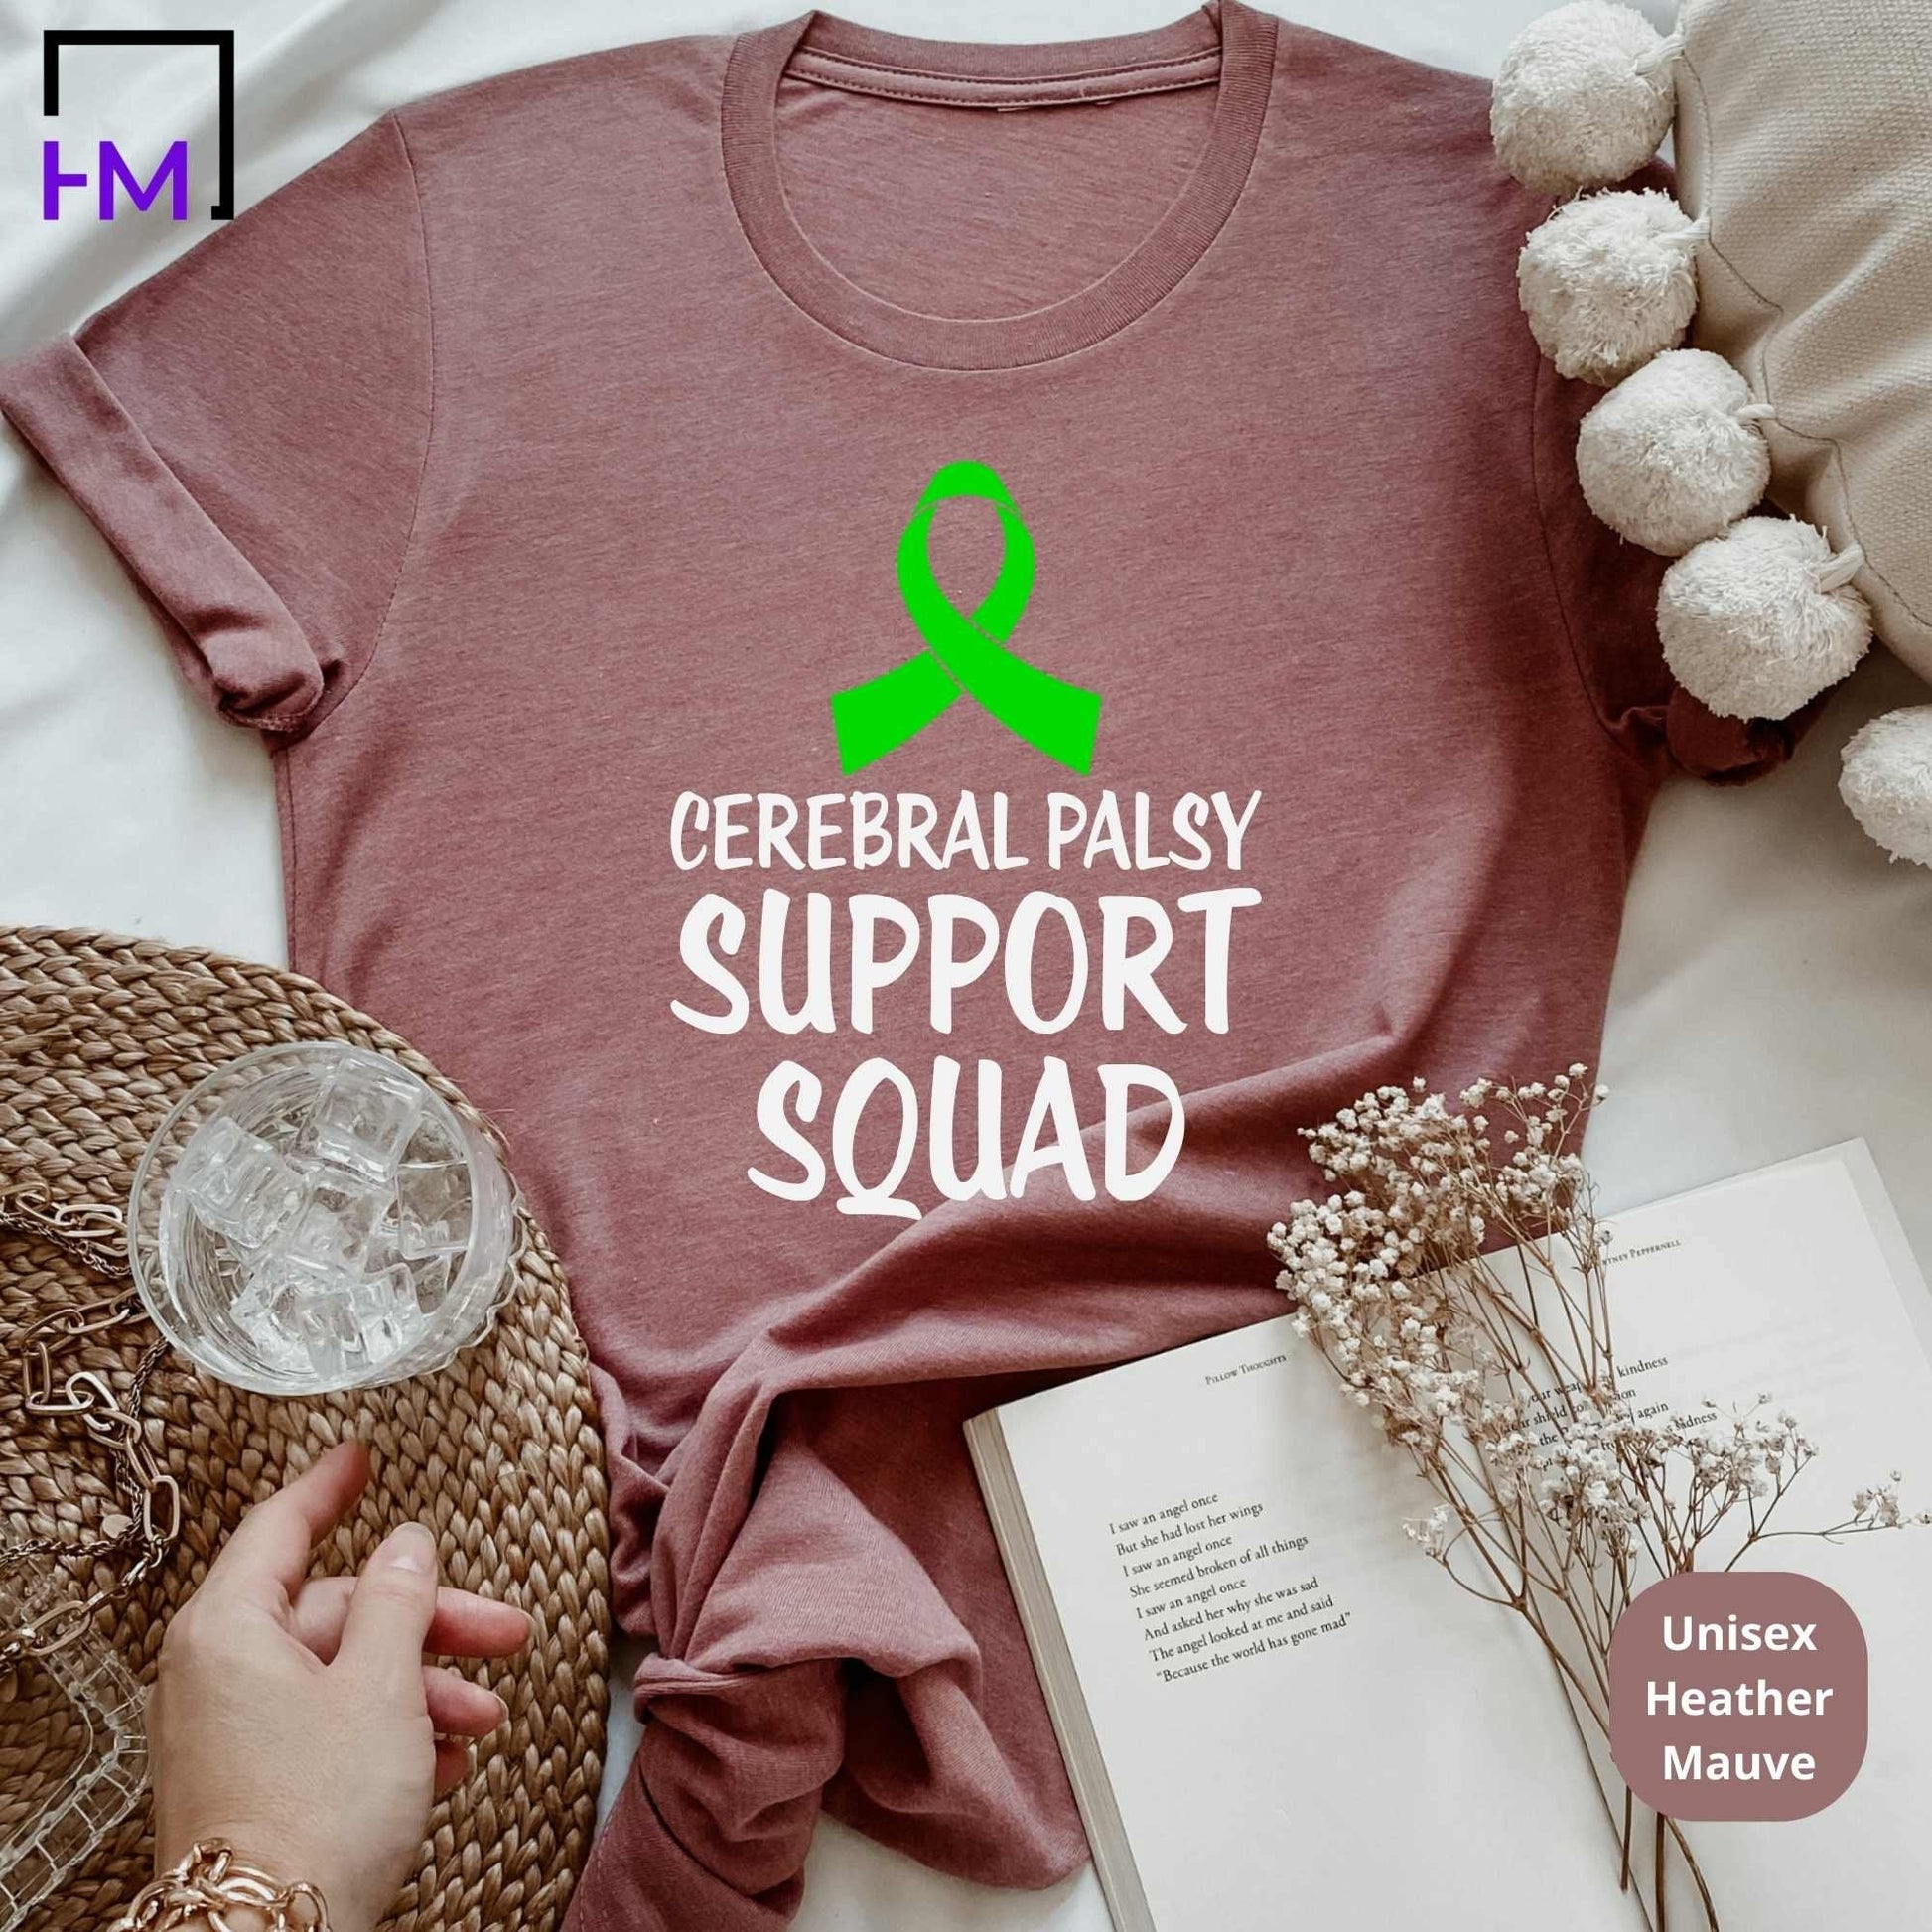 Cerebral Palsy Support Squad Shirt, Motivational Shirt, Cerebral Palsy Shirt, Cerebral Palsy Gifts,Cerebral Palsy Awareness Shirt,CP Support